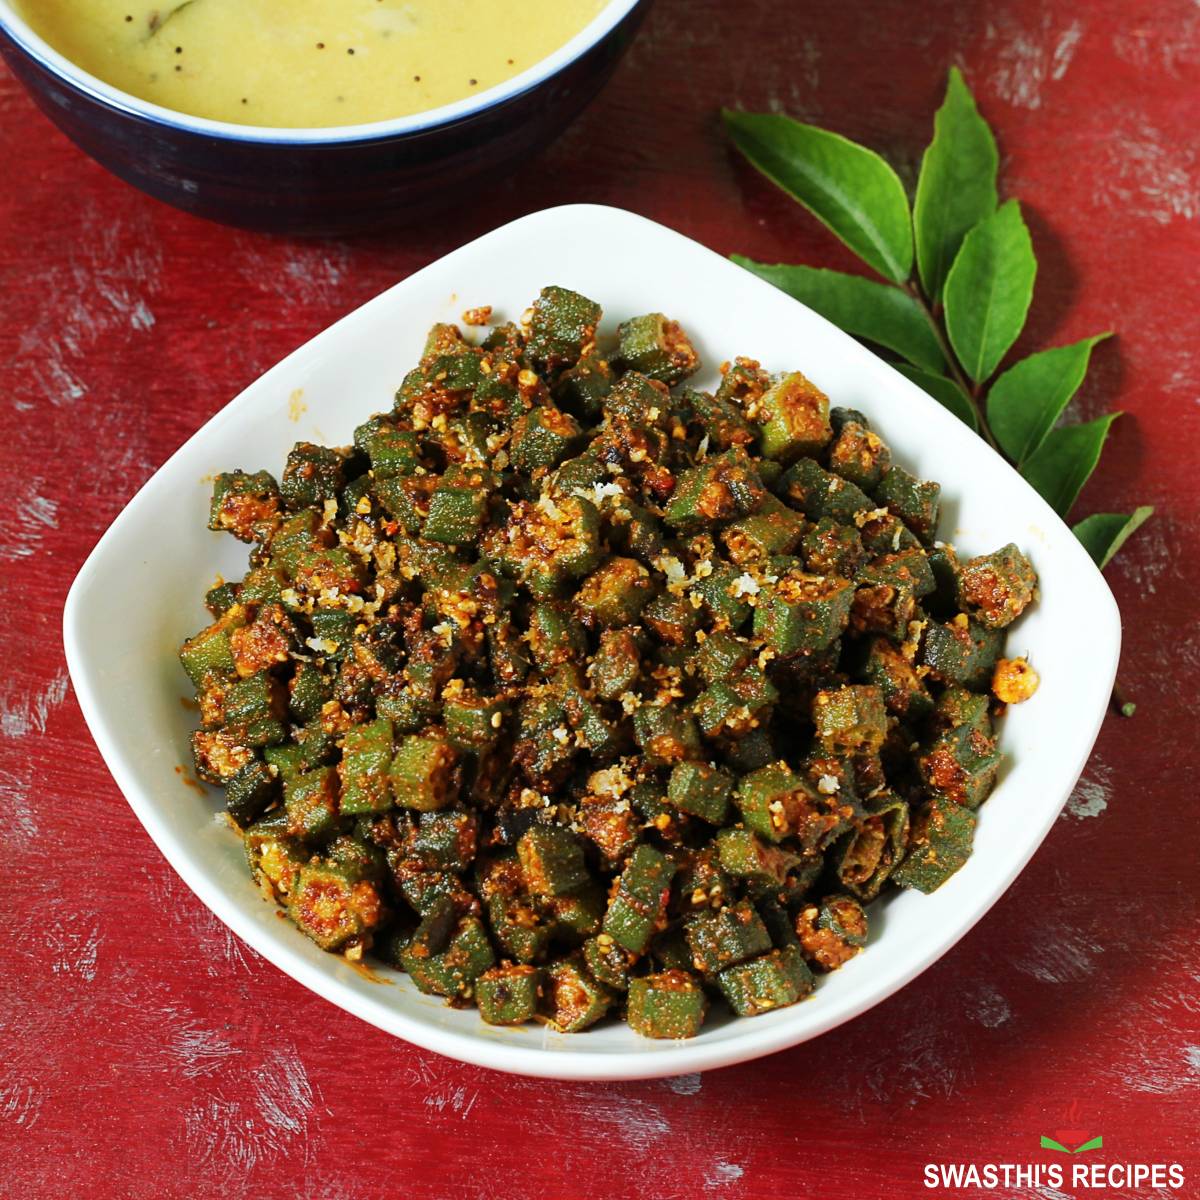 Bhindi fry recipe made with okra, spices and curry leaves